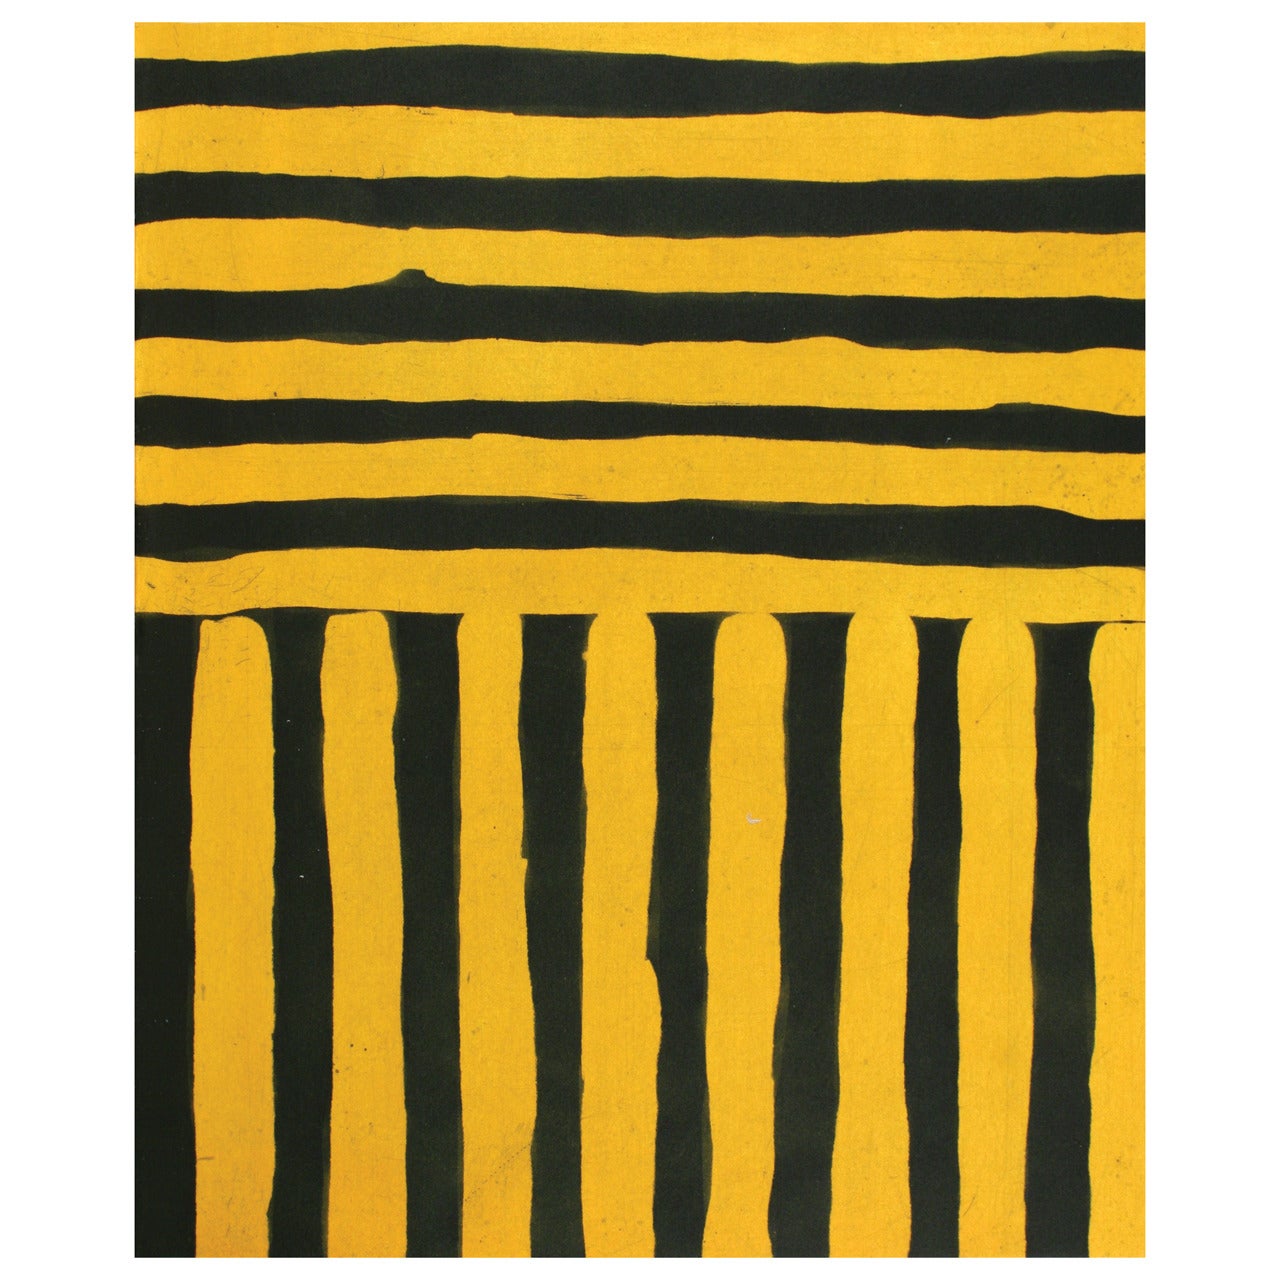 "Heart of Darkness" Book by Joseph Conrad, Illustrated by Sean Scully